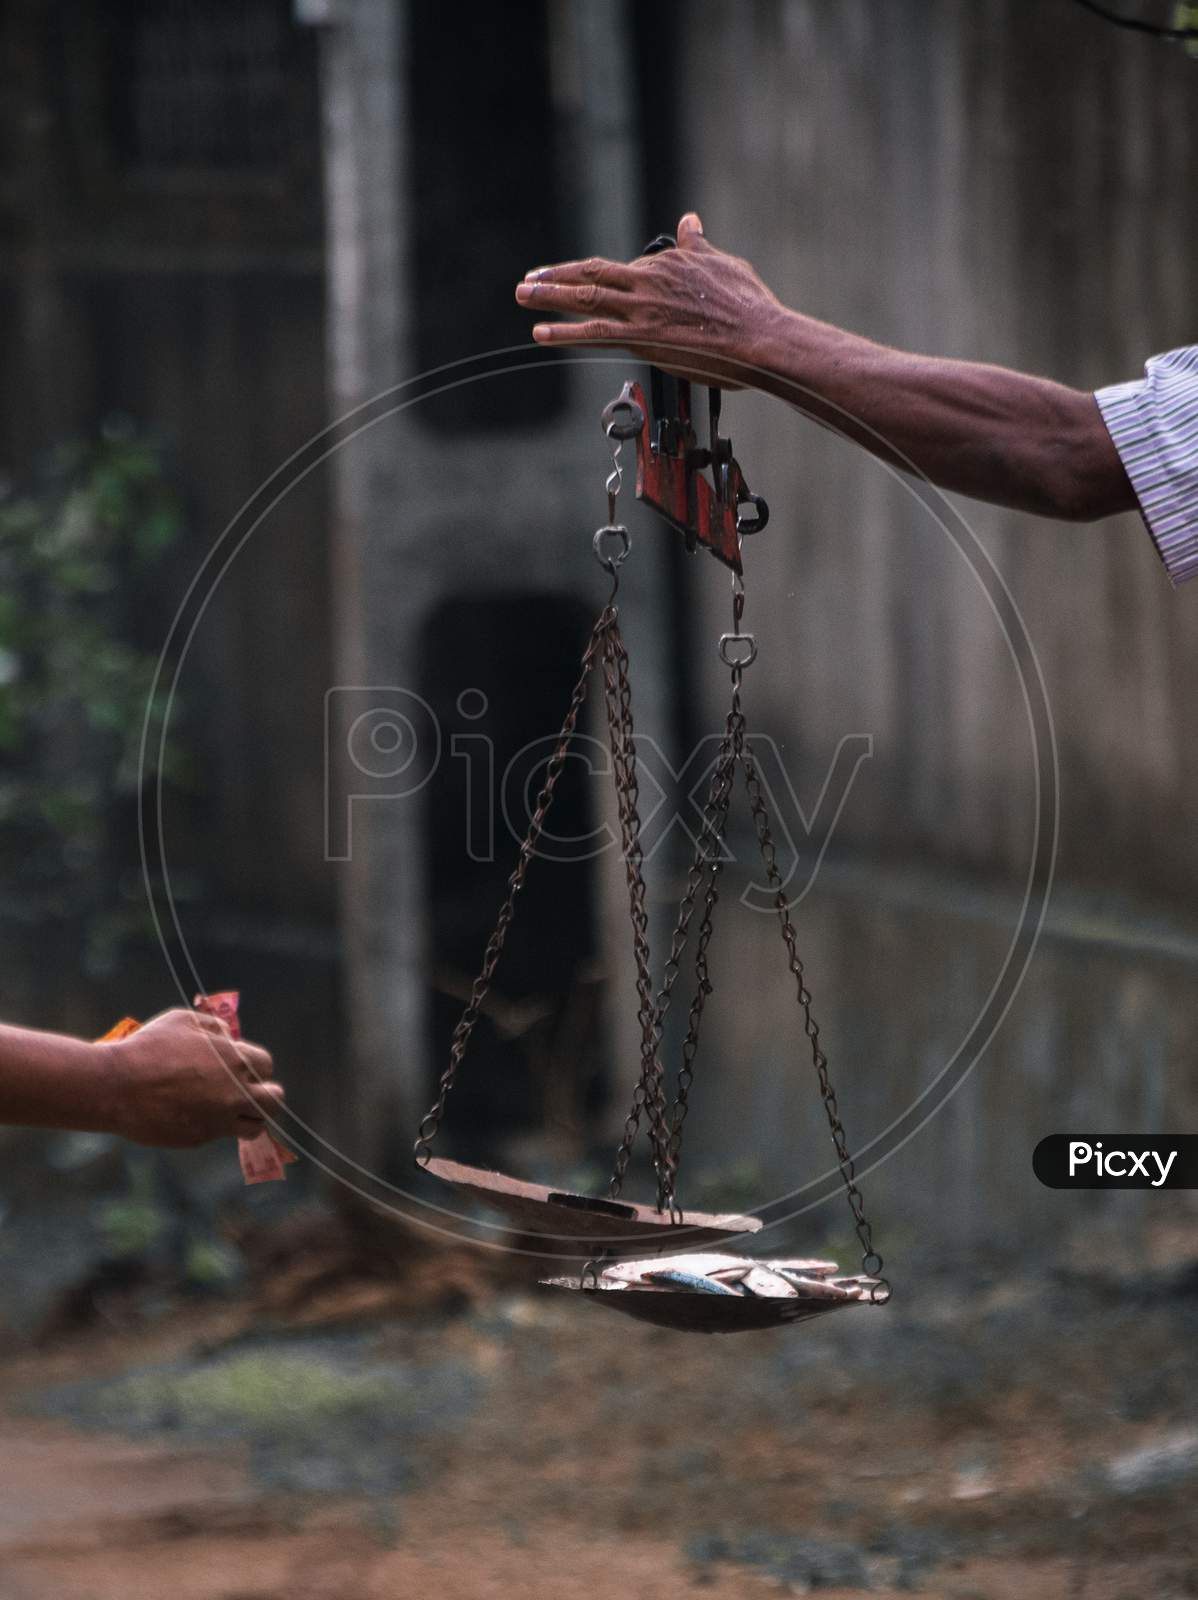 Fishermen Hand Holding A Scale, Balancing Fish And The Weight, Typical Way Of Measuring The Weight Of Fish In Major Parts Of Sri Lanka.